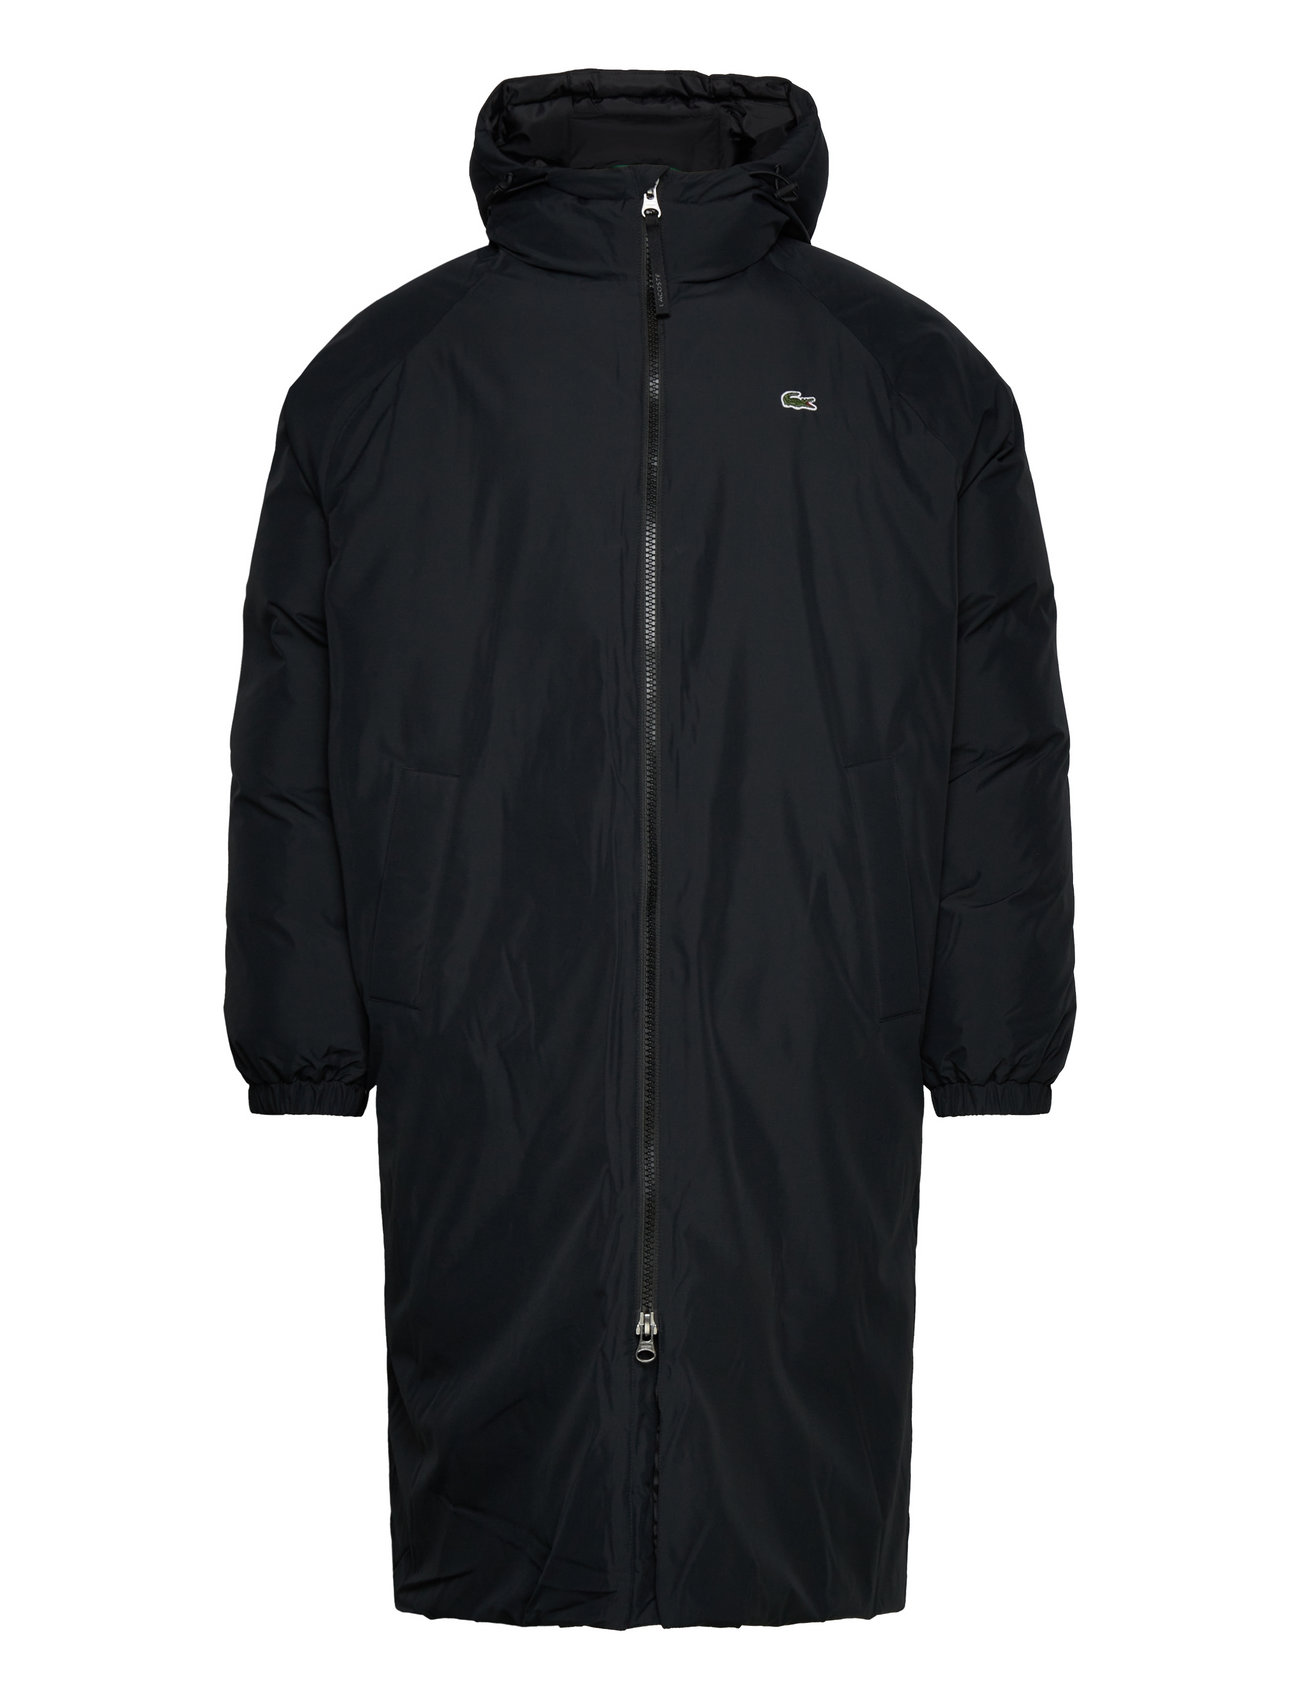 Lacoste Parkas u0026 Blousons - 420 €. Buy Rainwear from Lacoste online at  Boozt.com. Fast delivery and easy returns